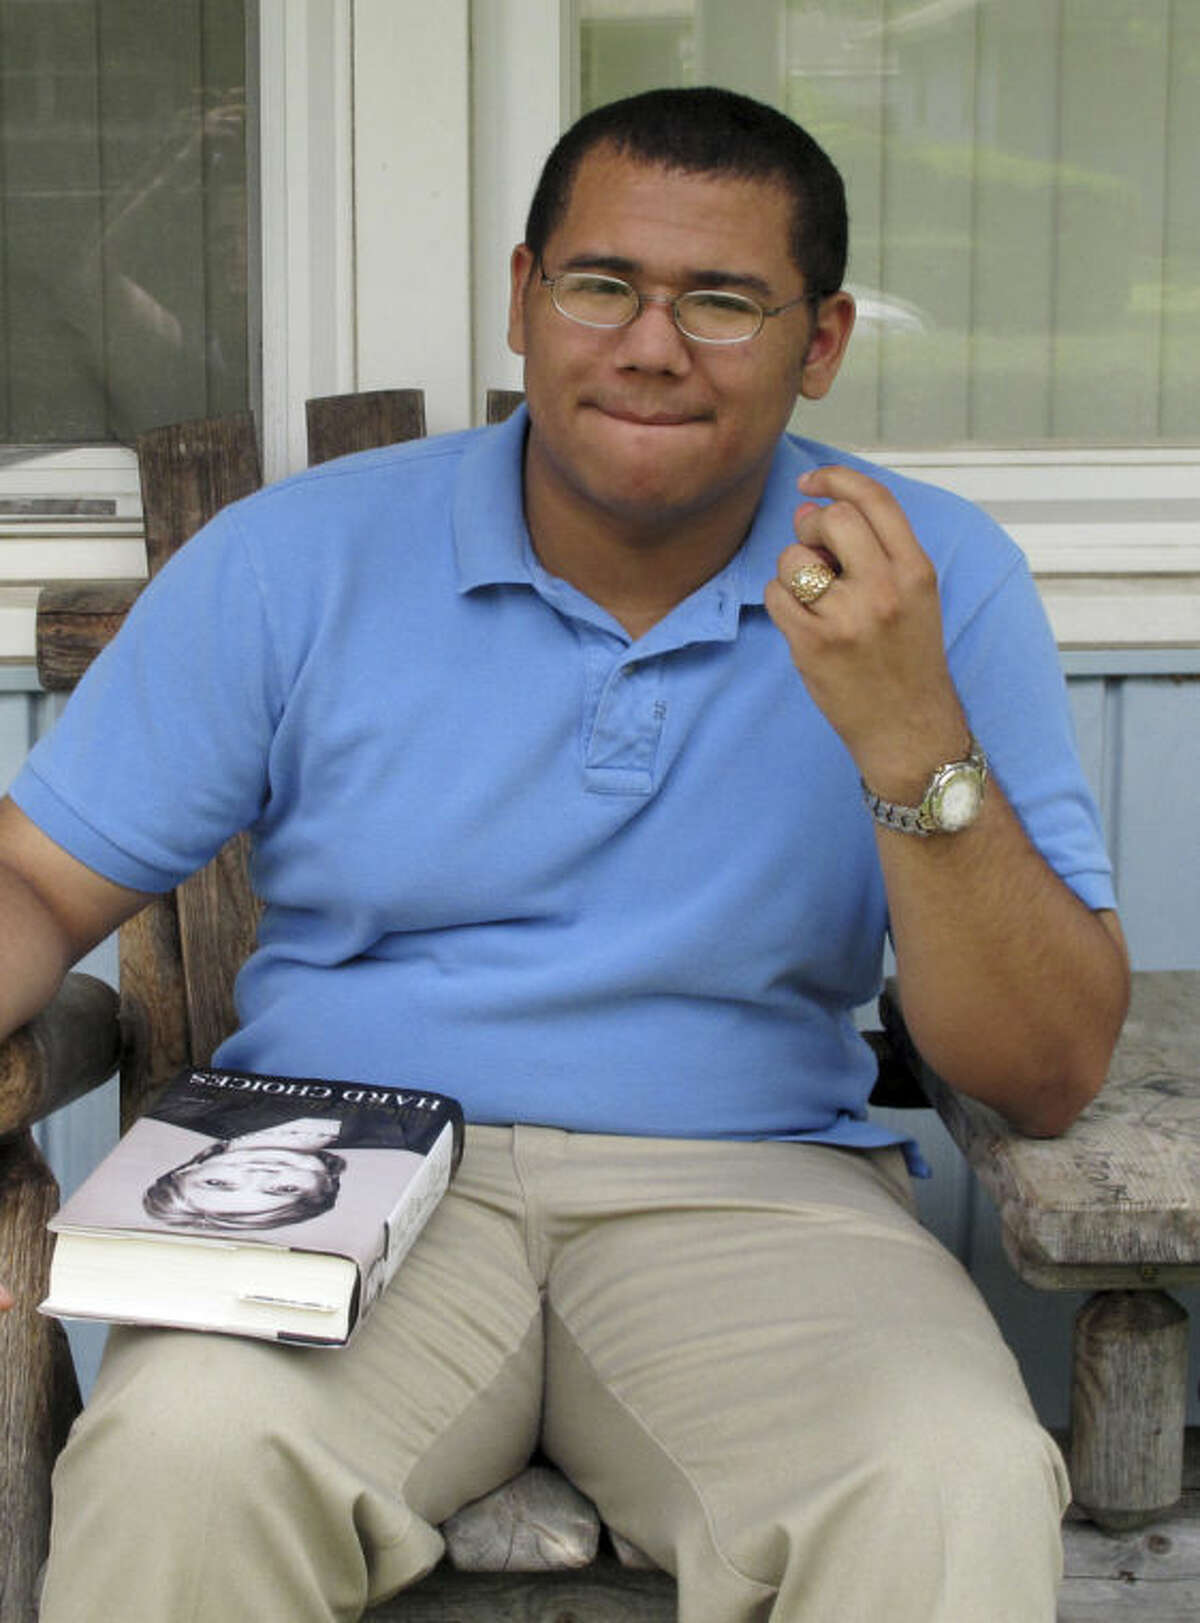 David Vernon, 18, takes a break while reading on his porch in Columbus, Ohio, on Monday, July 21, 2014. Both Republicans and Democrats are seeking voters like Vernon, a self-described moderate and an avid social media user who says he has seen a steady increase in tweets from both parties aimed at attracting younger African-American voters to get involved in political campaigns. (AP Photo)